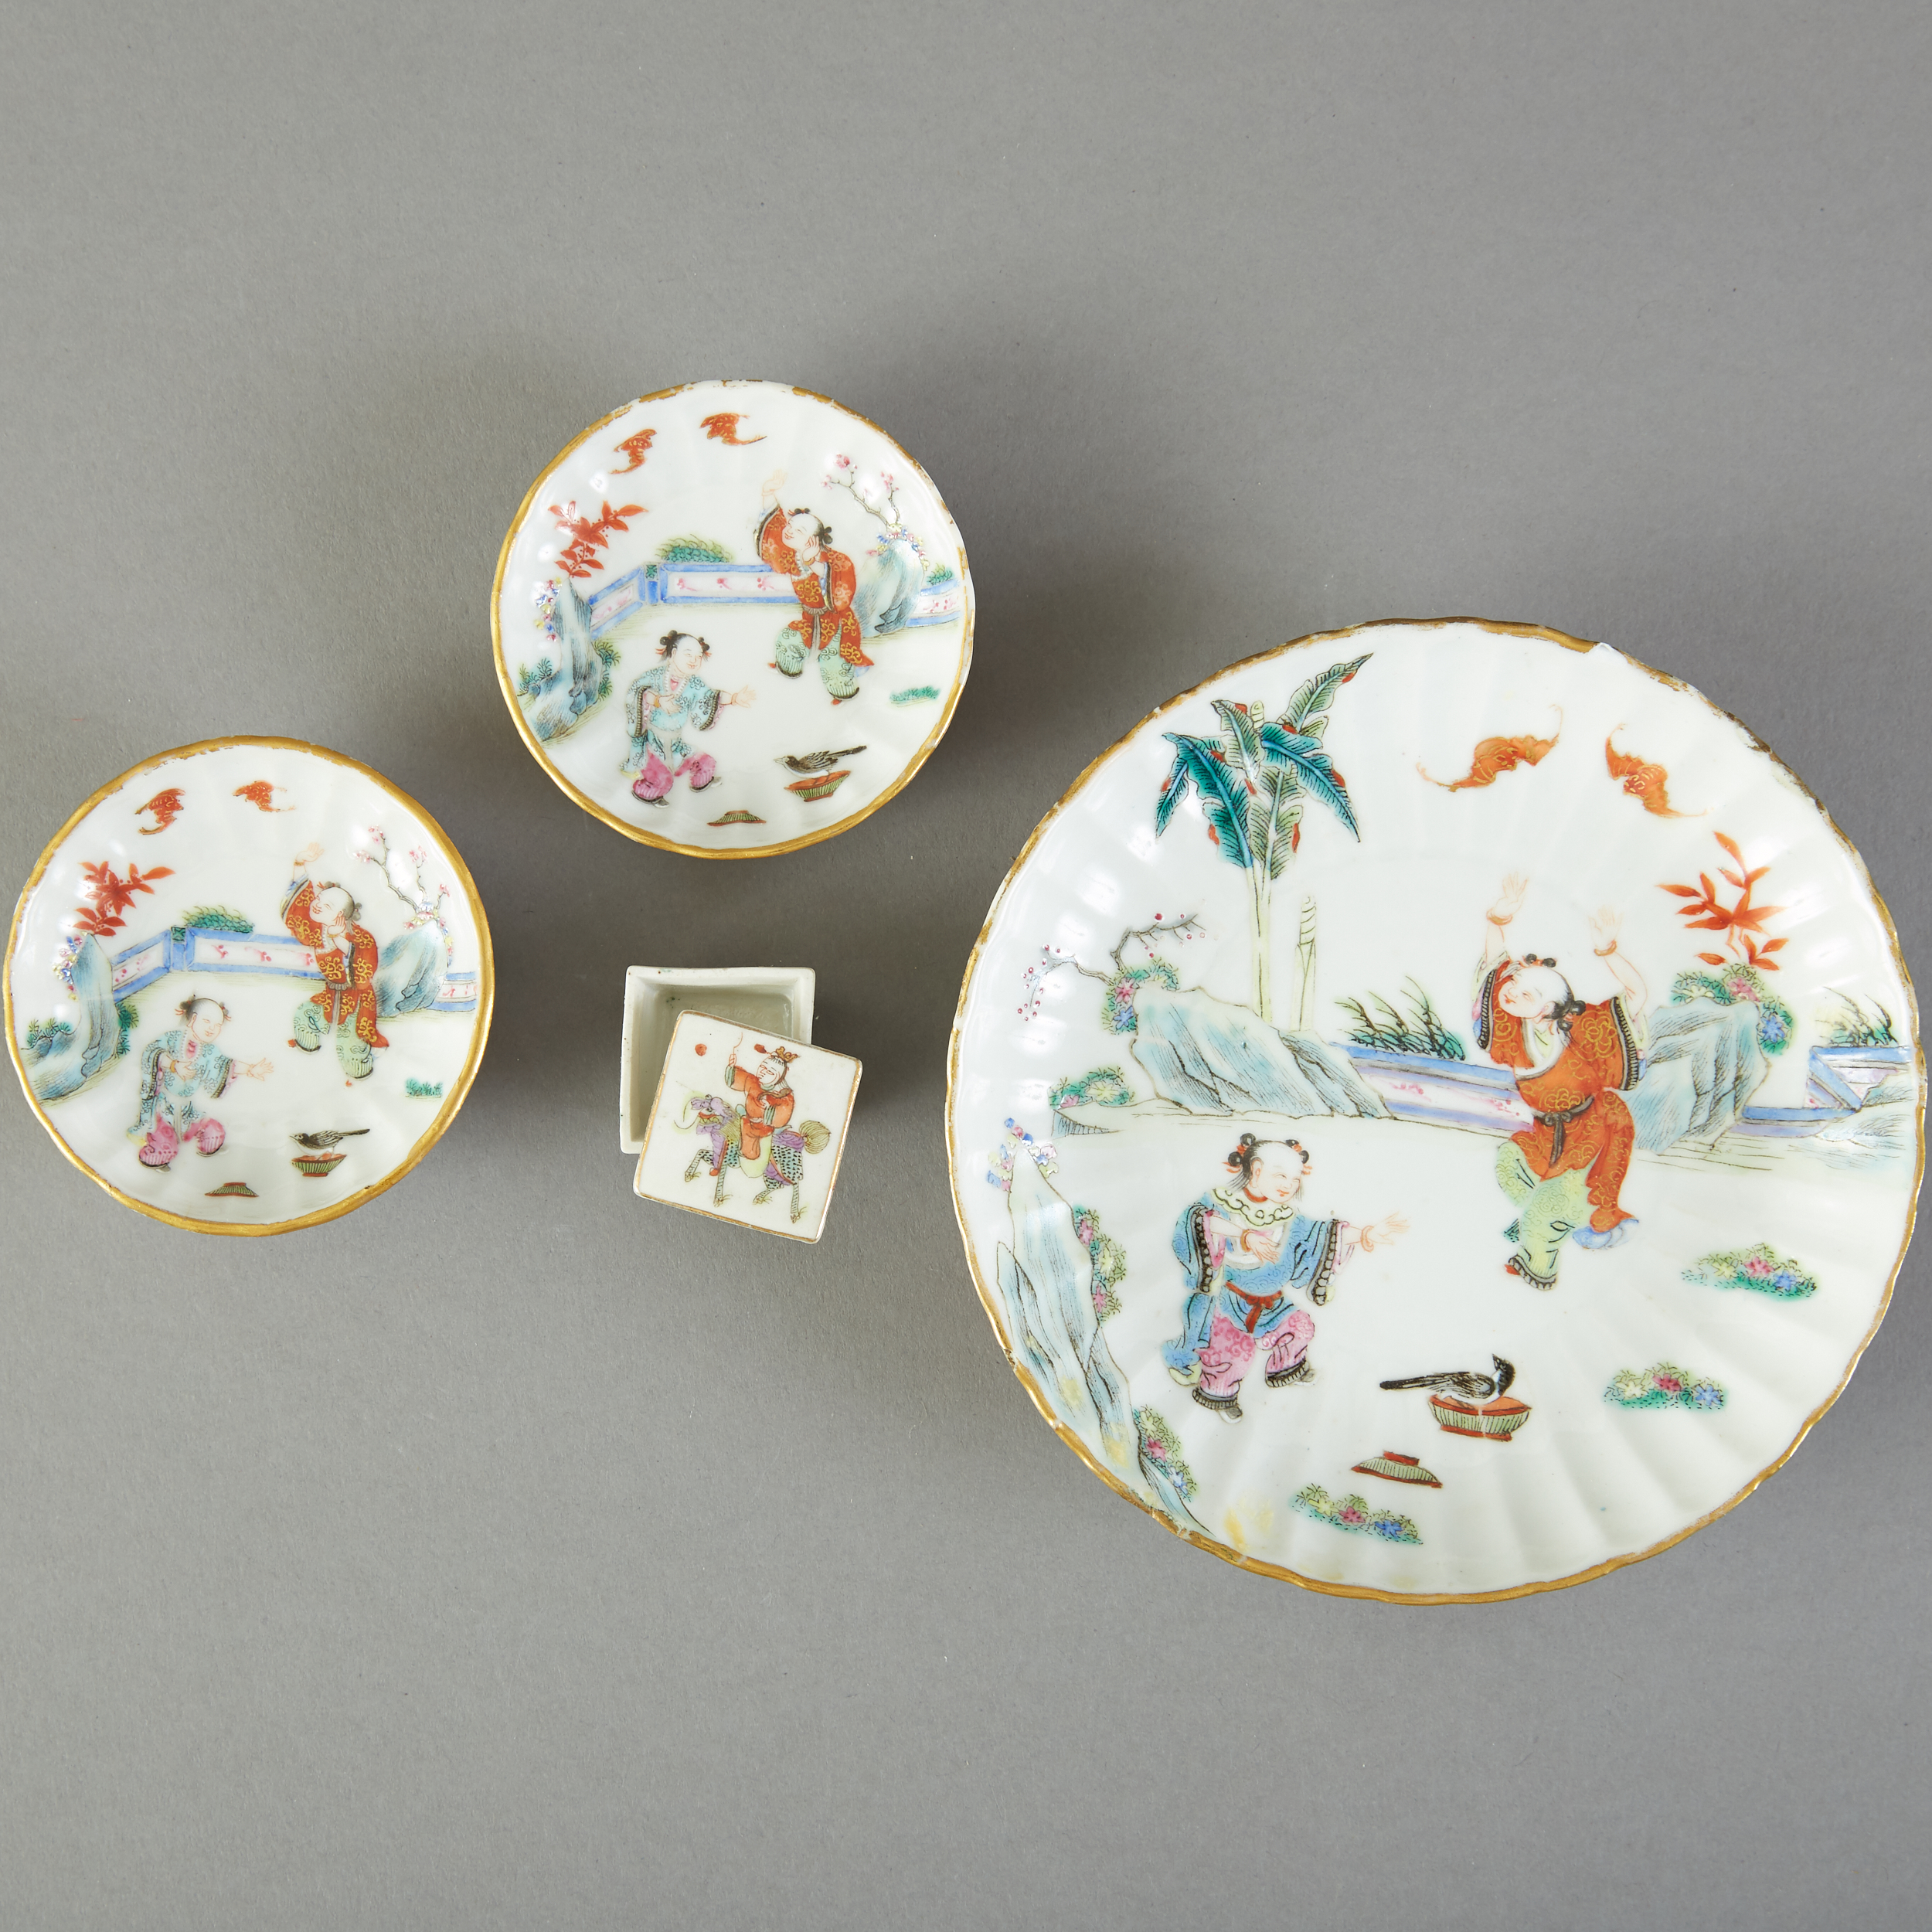 Grp 4: 19th c. Chinese Famille Rose Porcelain Plates Pill Box - Image 2 of 7